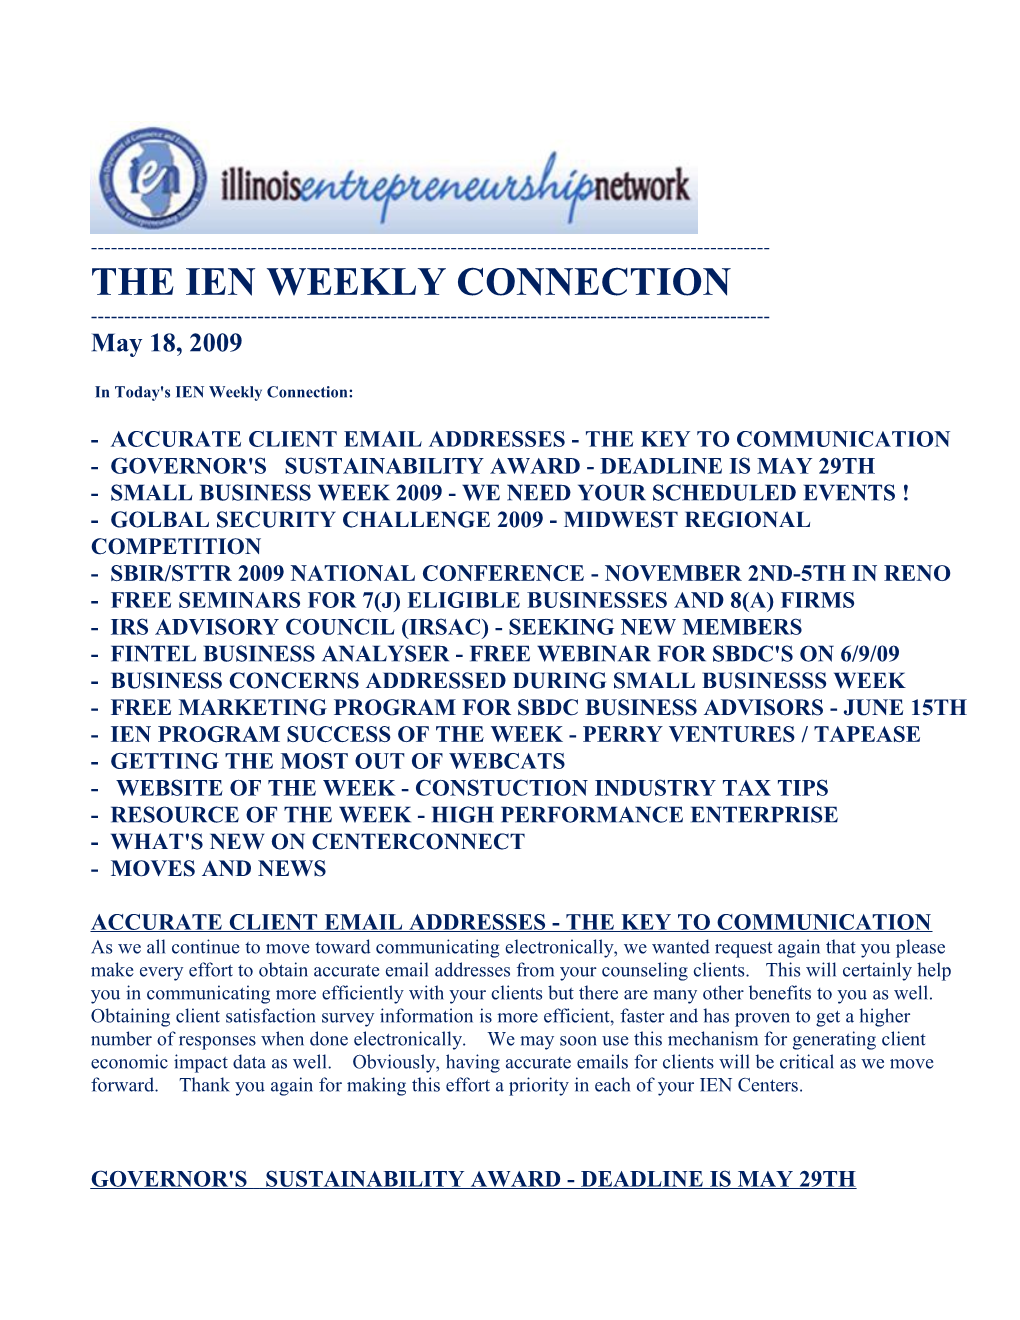 The Ien Weekly Connection s5